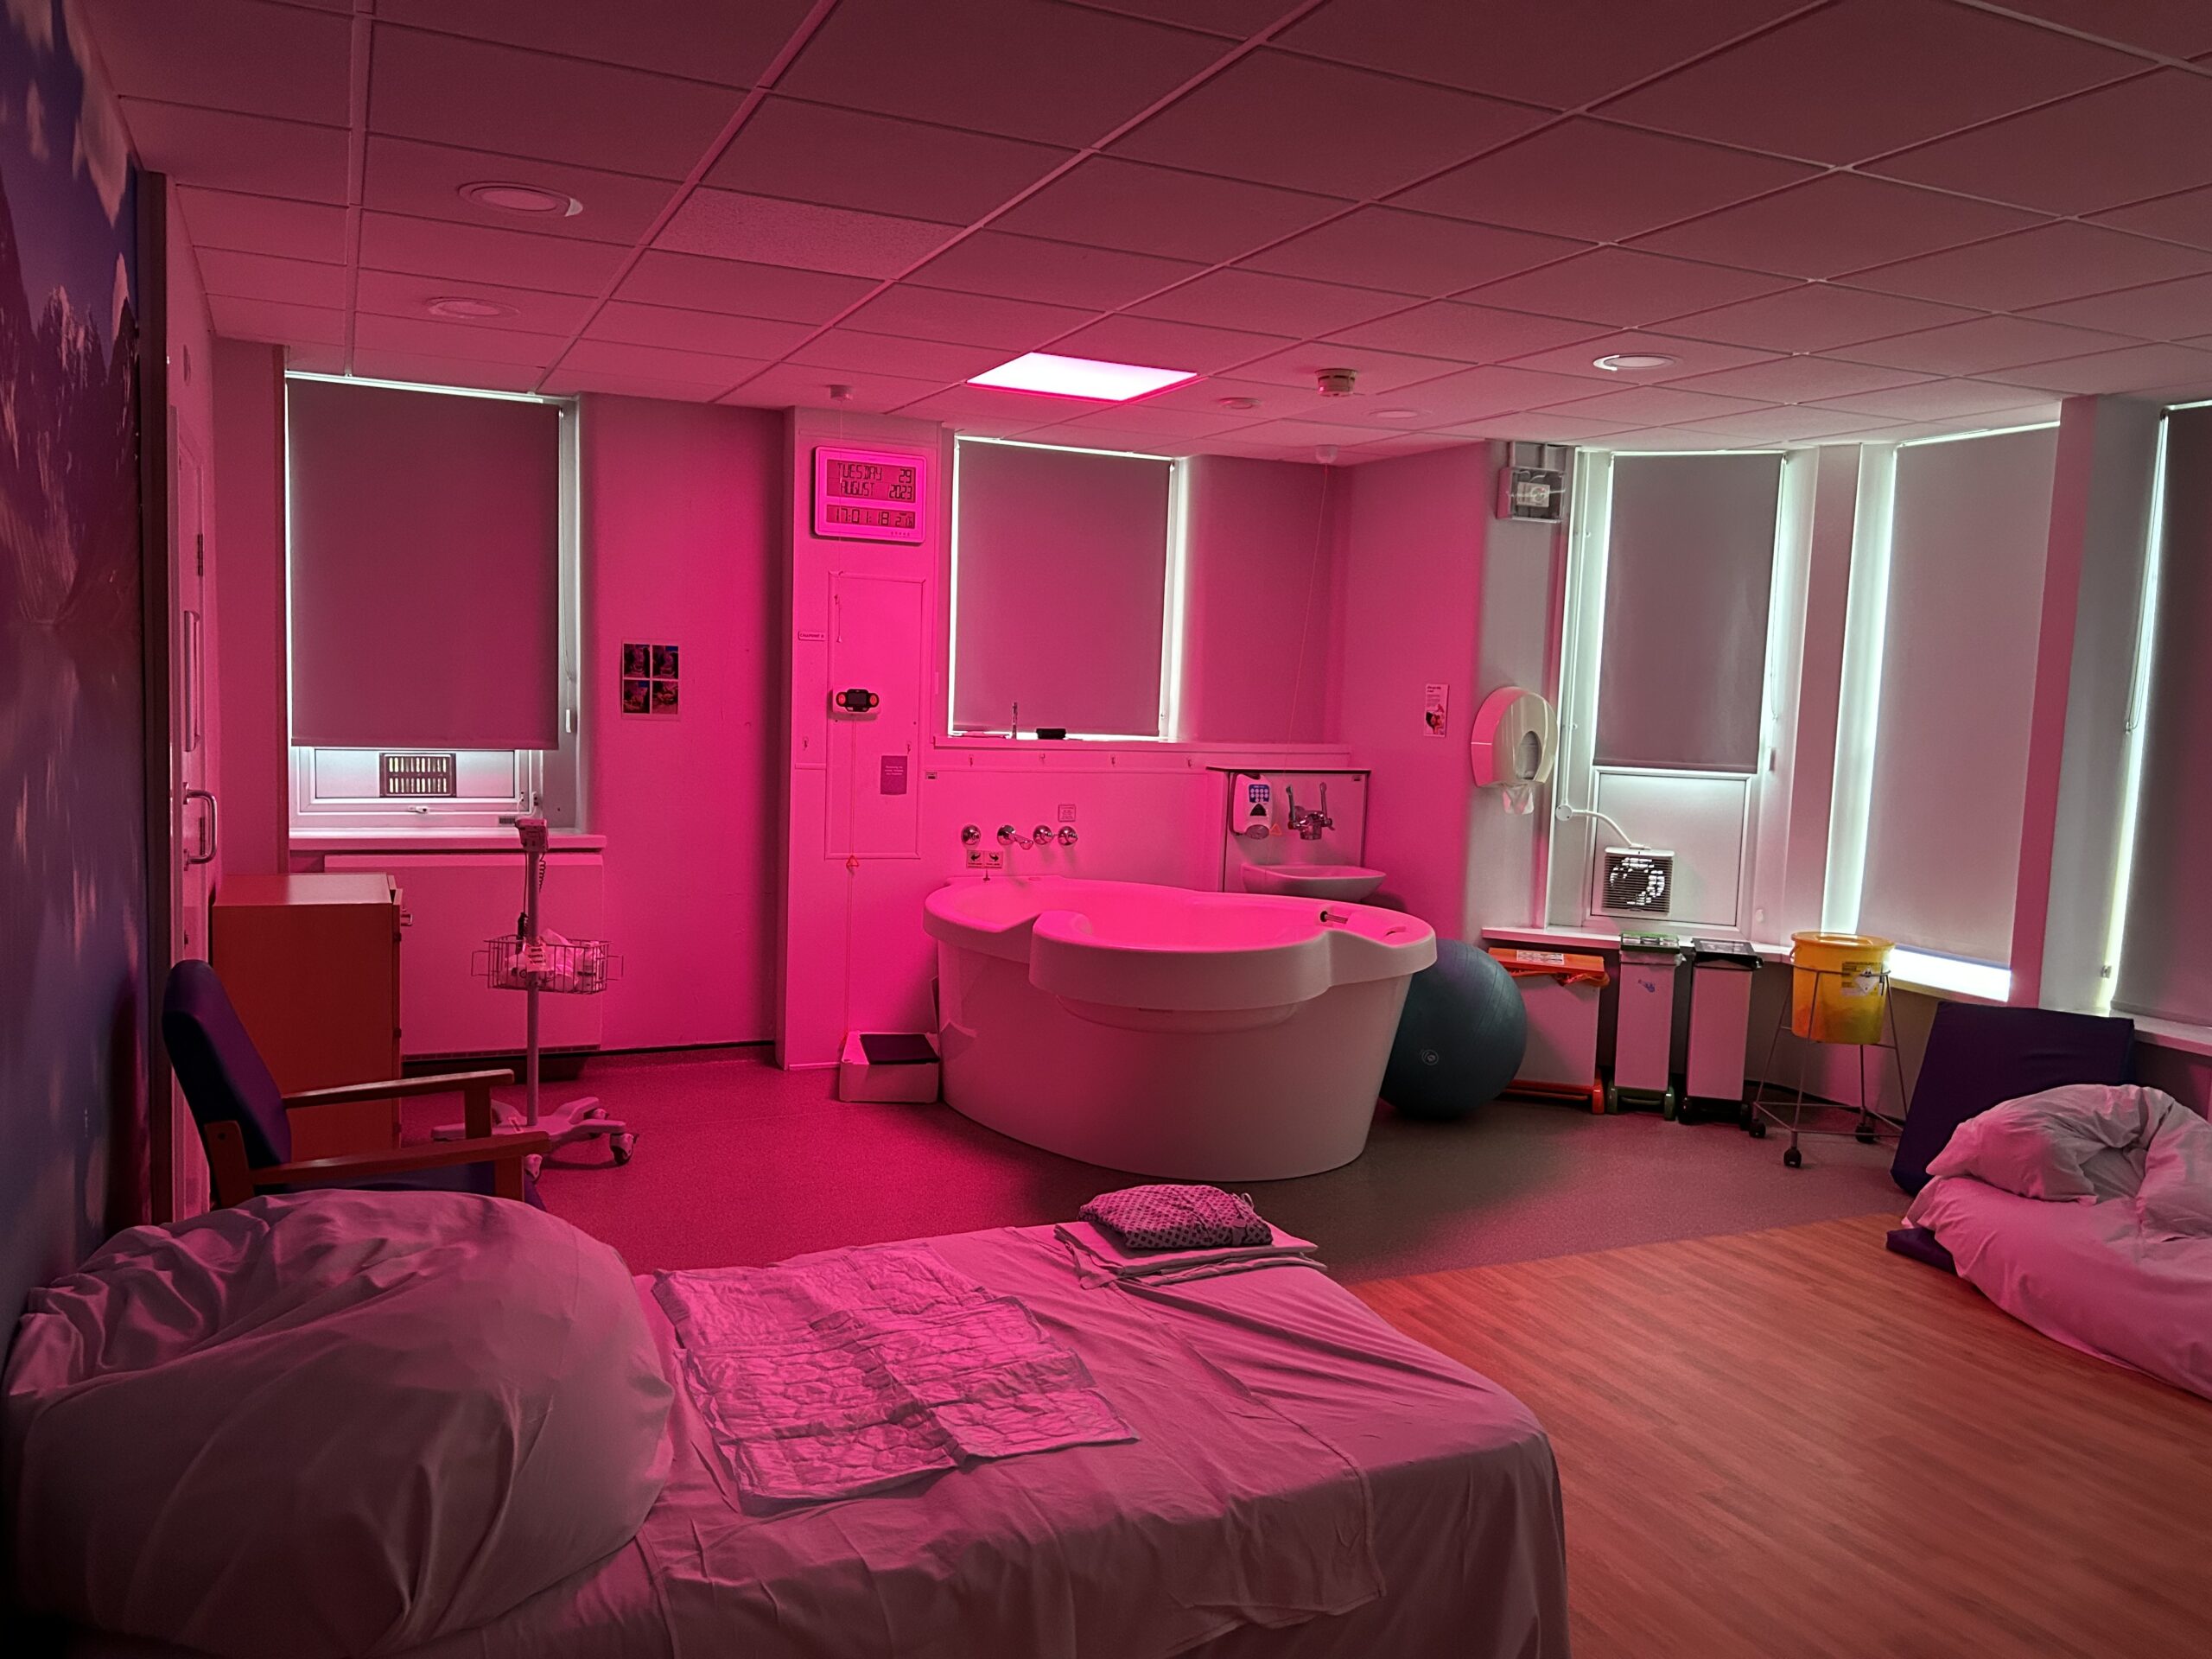 A birth centre room with a bed, a bedside table, and a bathtub bathed in pink light.